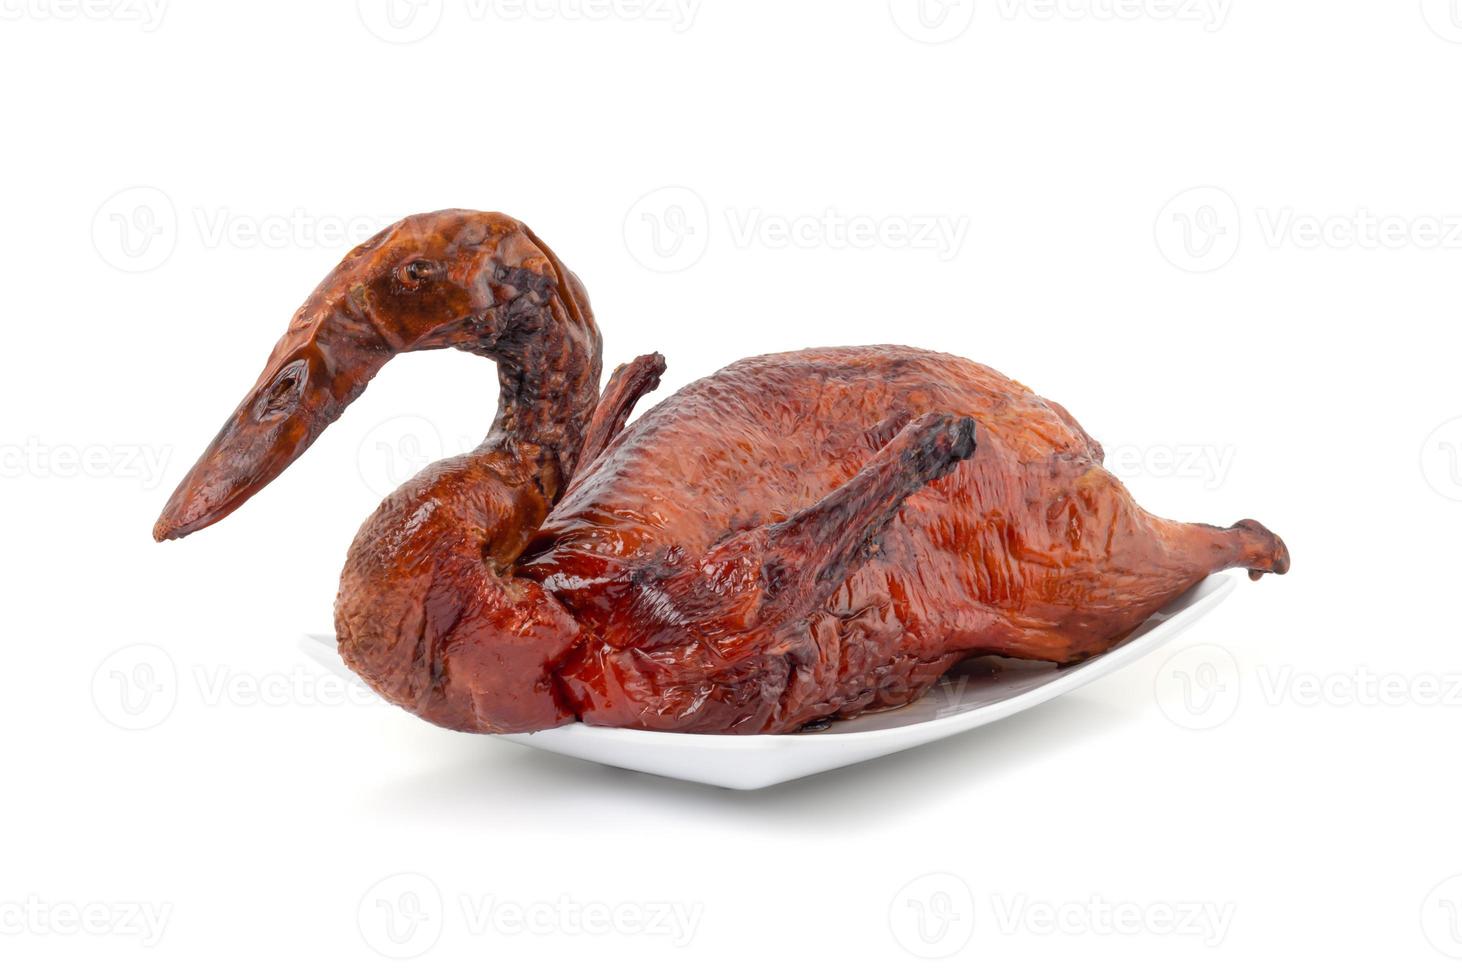 Whole roasted duck on white plate and white background photo